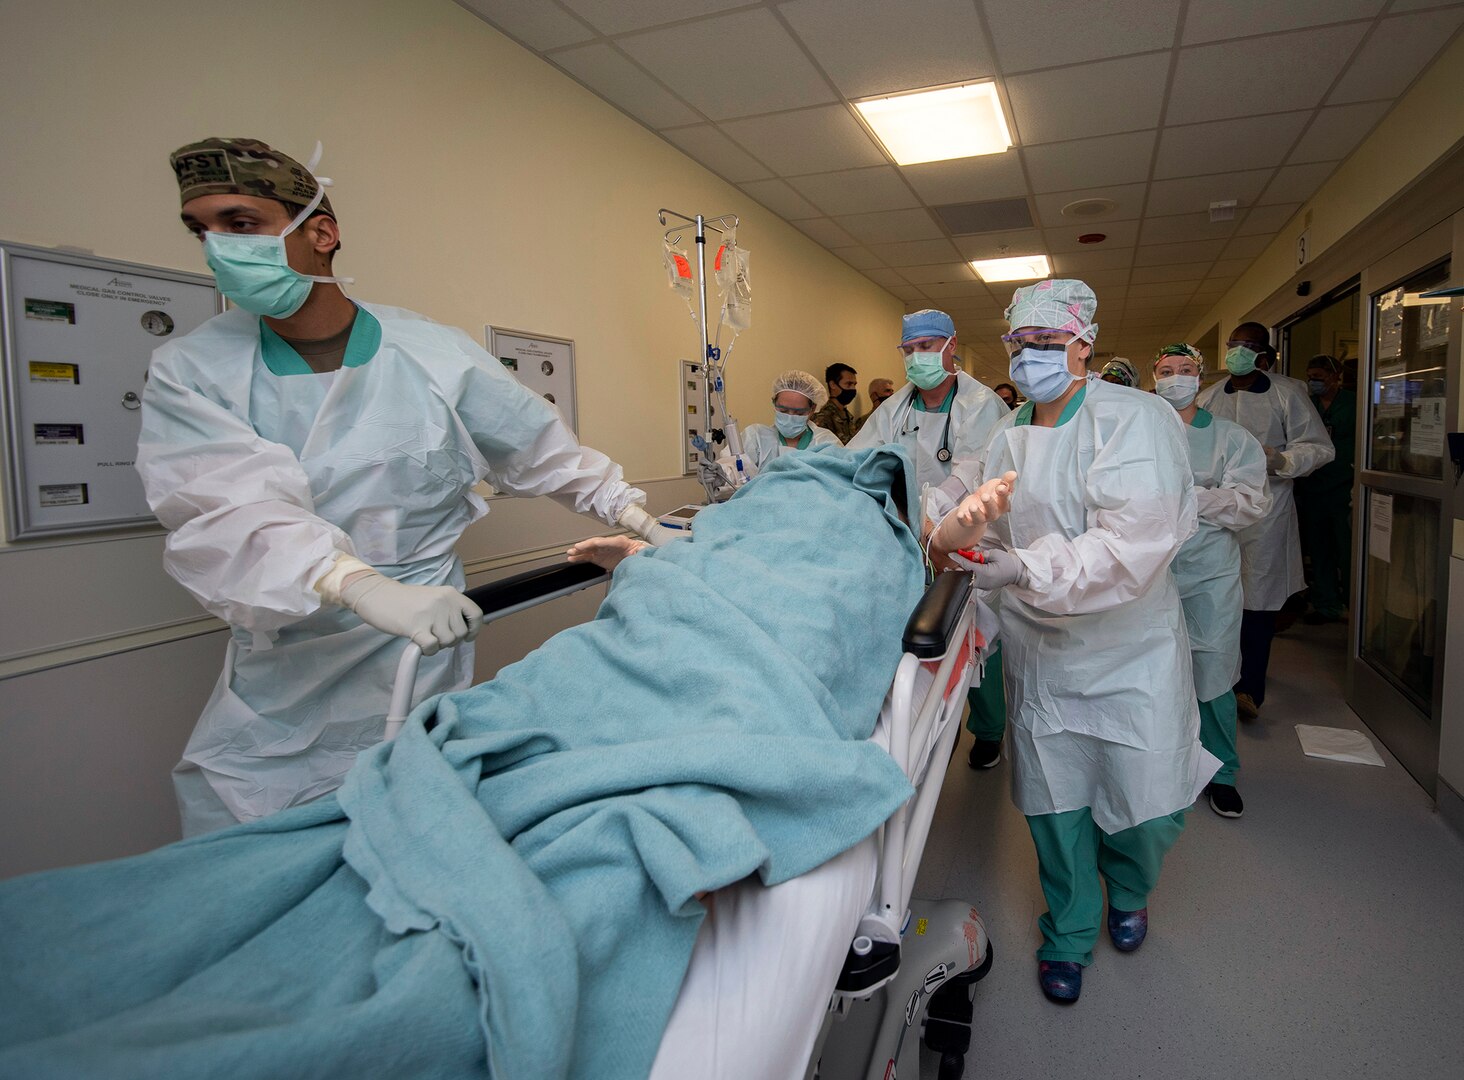 Members of the 555th Forward Surgical Team rush a simulated trauma patient to surgery during training with the Strategic Trauma Readiness Center of San Antonio, or STaRC, at Brooke Army Medical Center at Joint Base San Antonio-Fort Sam Houston, May 28, 2020.